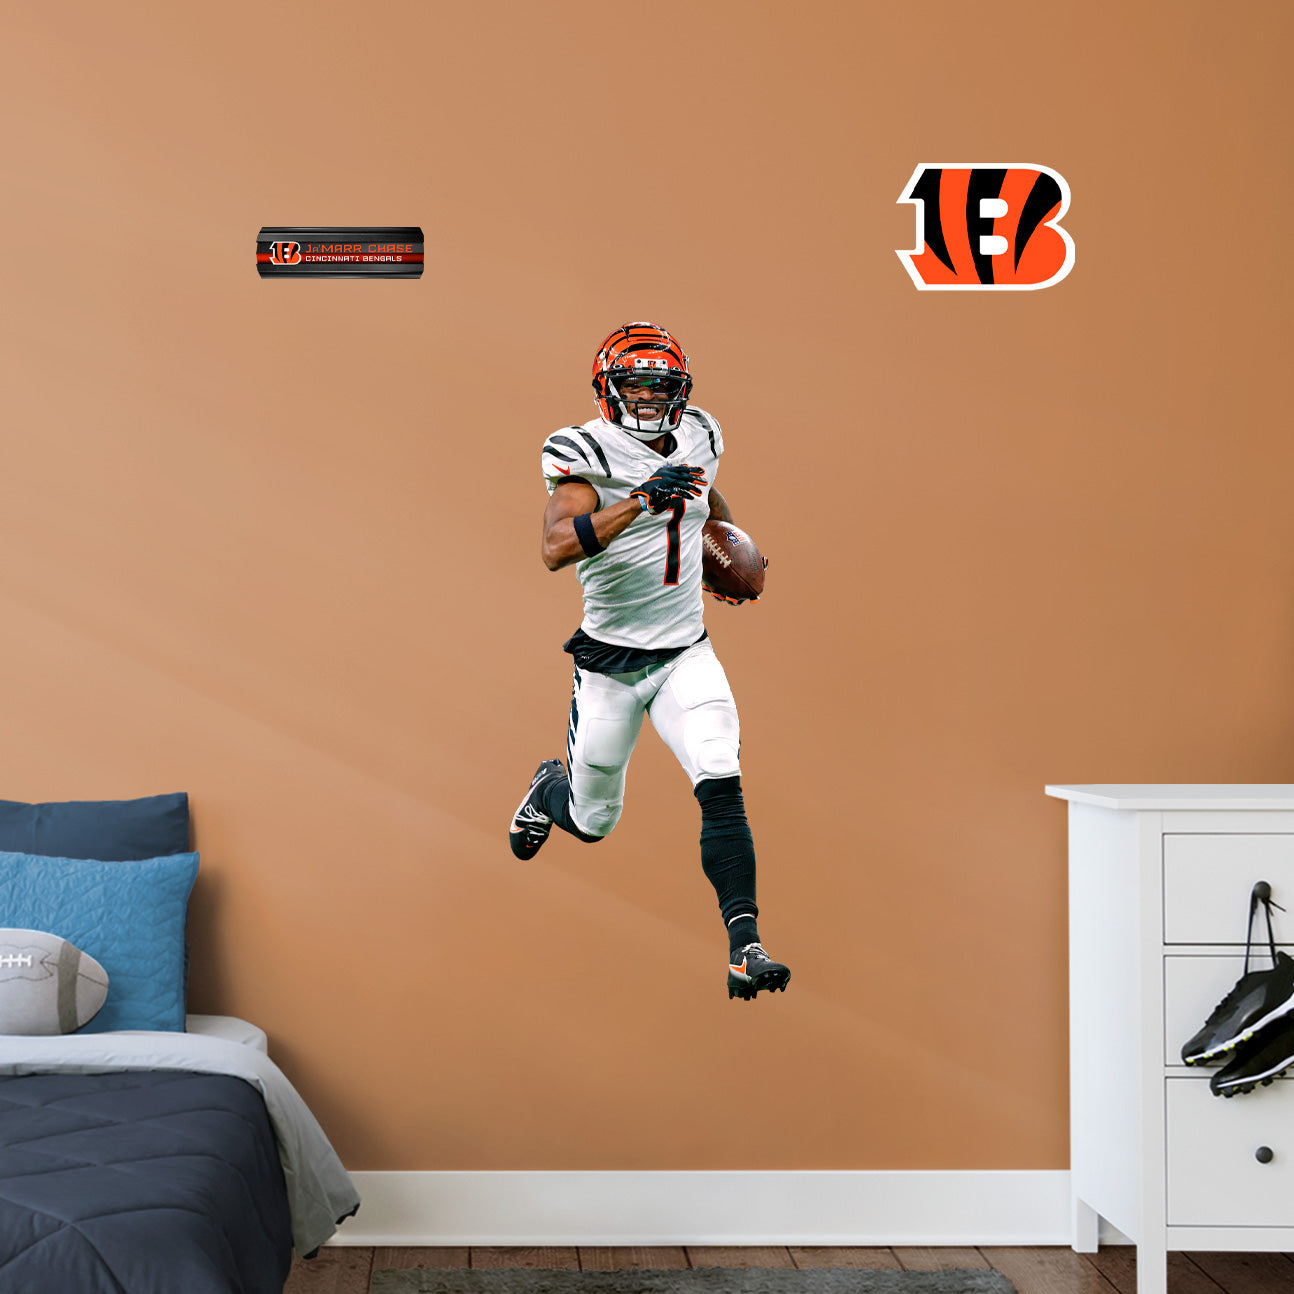 Cincinnati Bengals: Ja'Marr Chase Breakaway - Officially Licensed NFL Removable Adhesive Decal